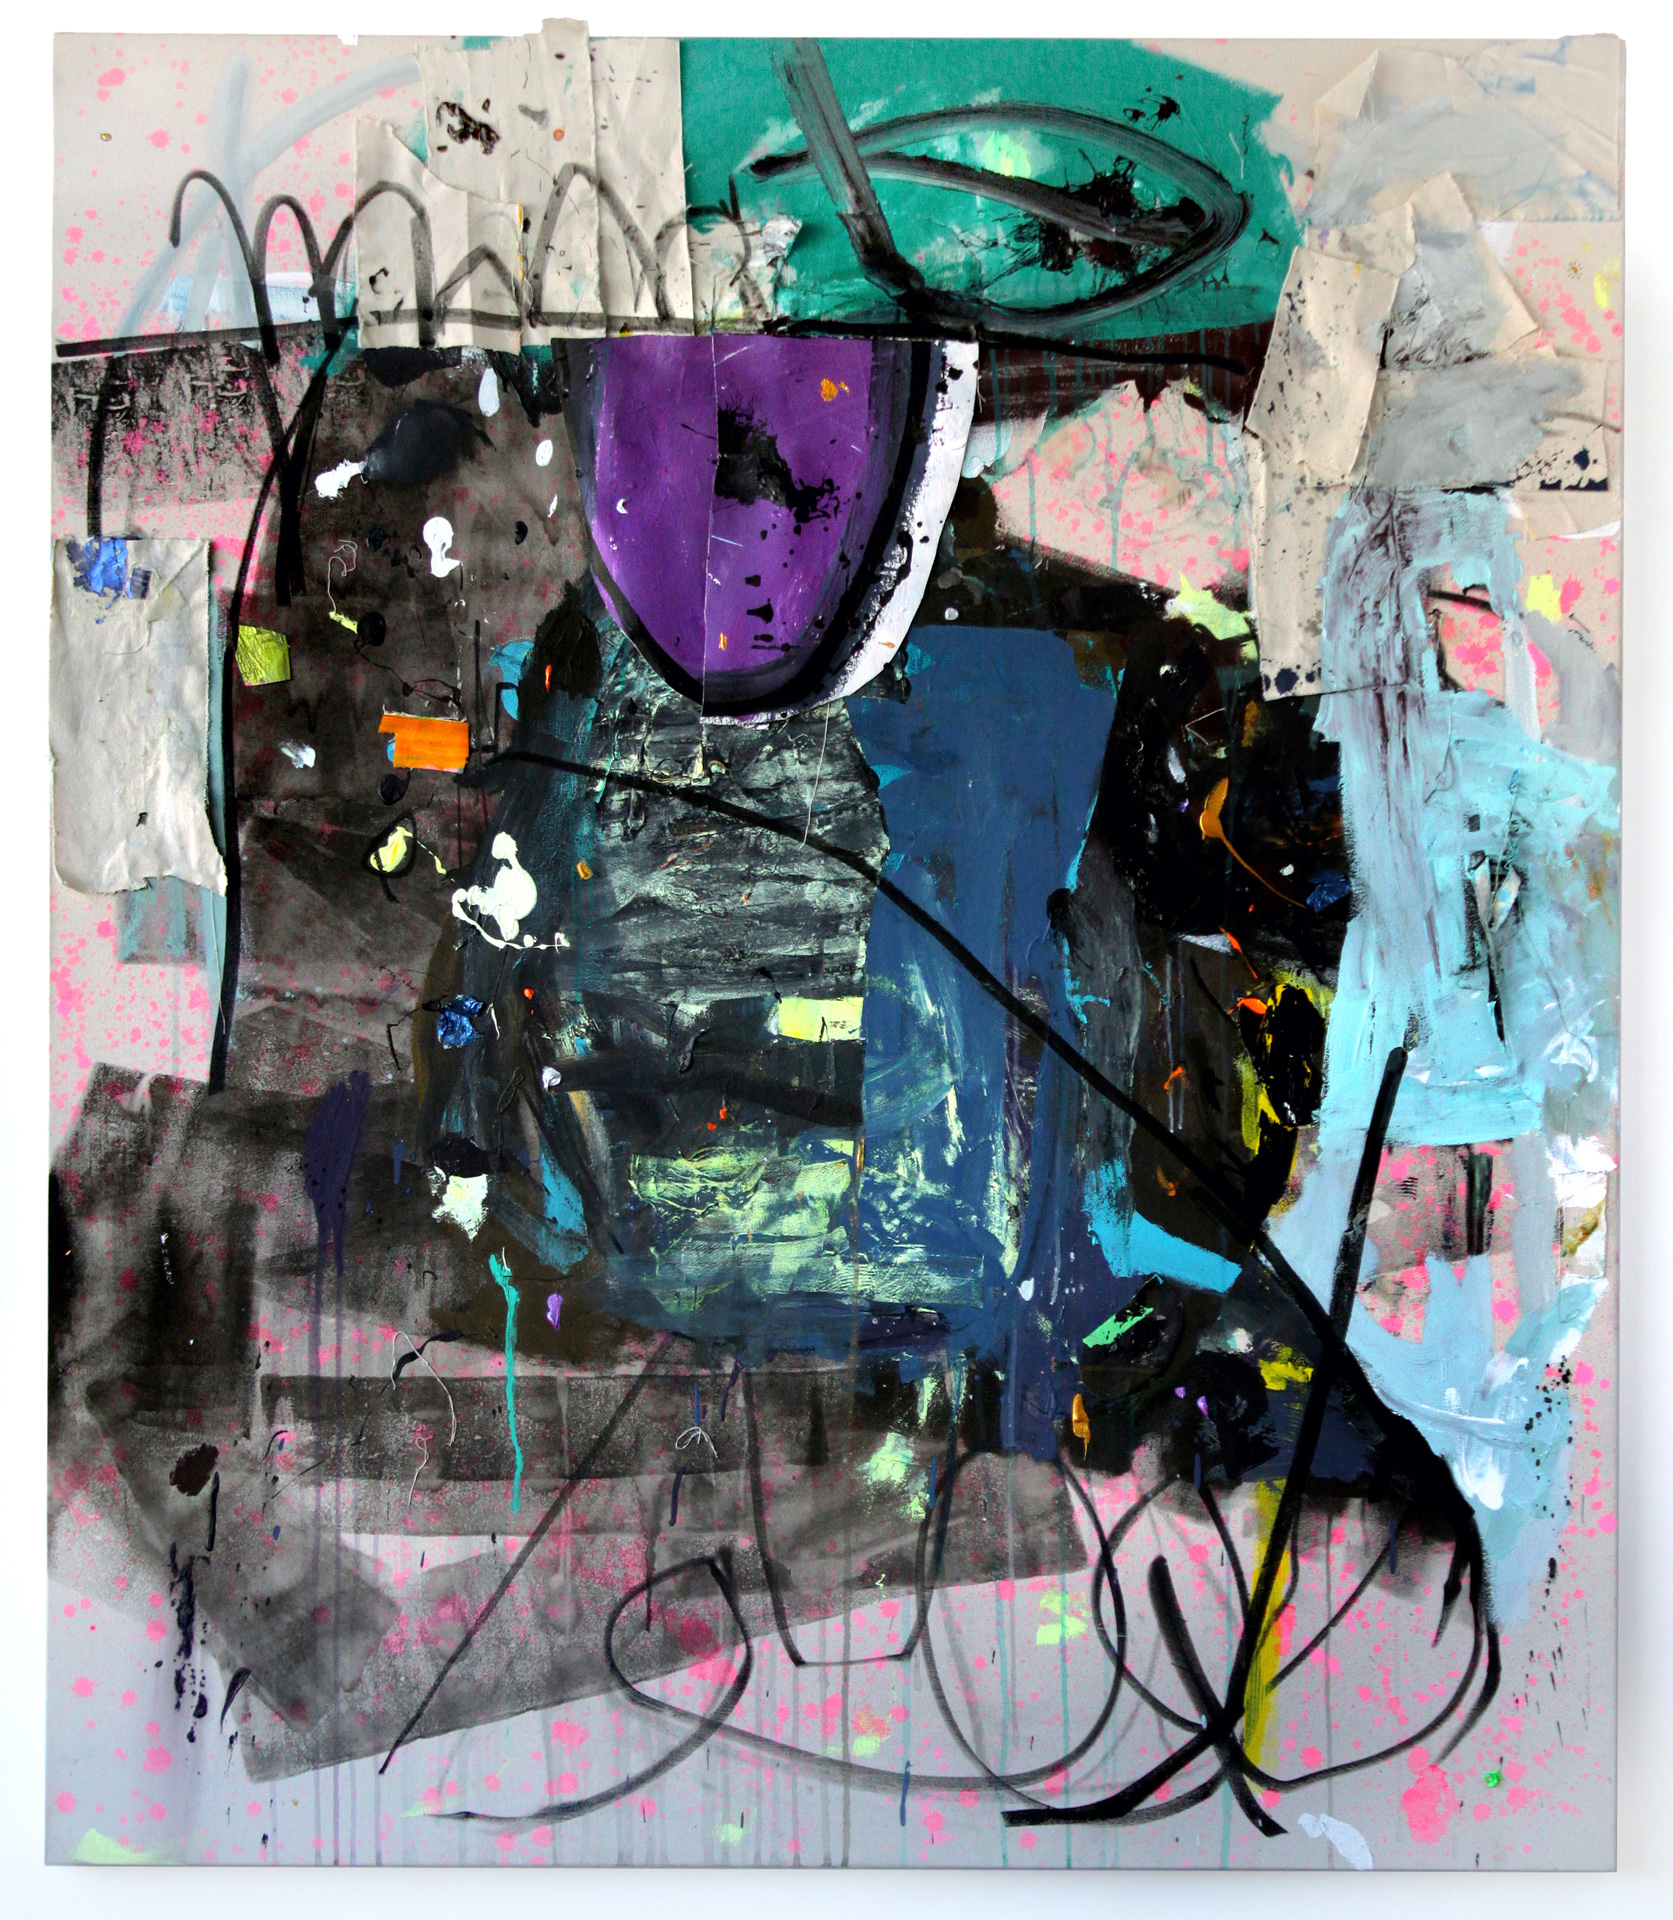 70 (vertical) x 60 (horizontal) inches acrylic, marker and canvas 2015